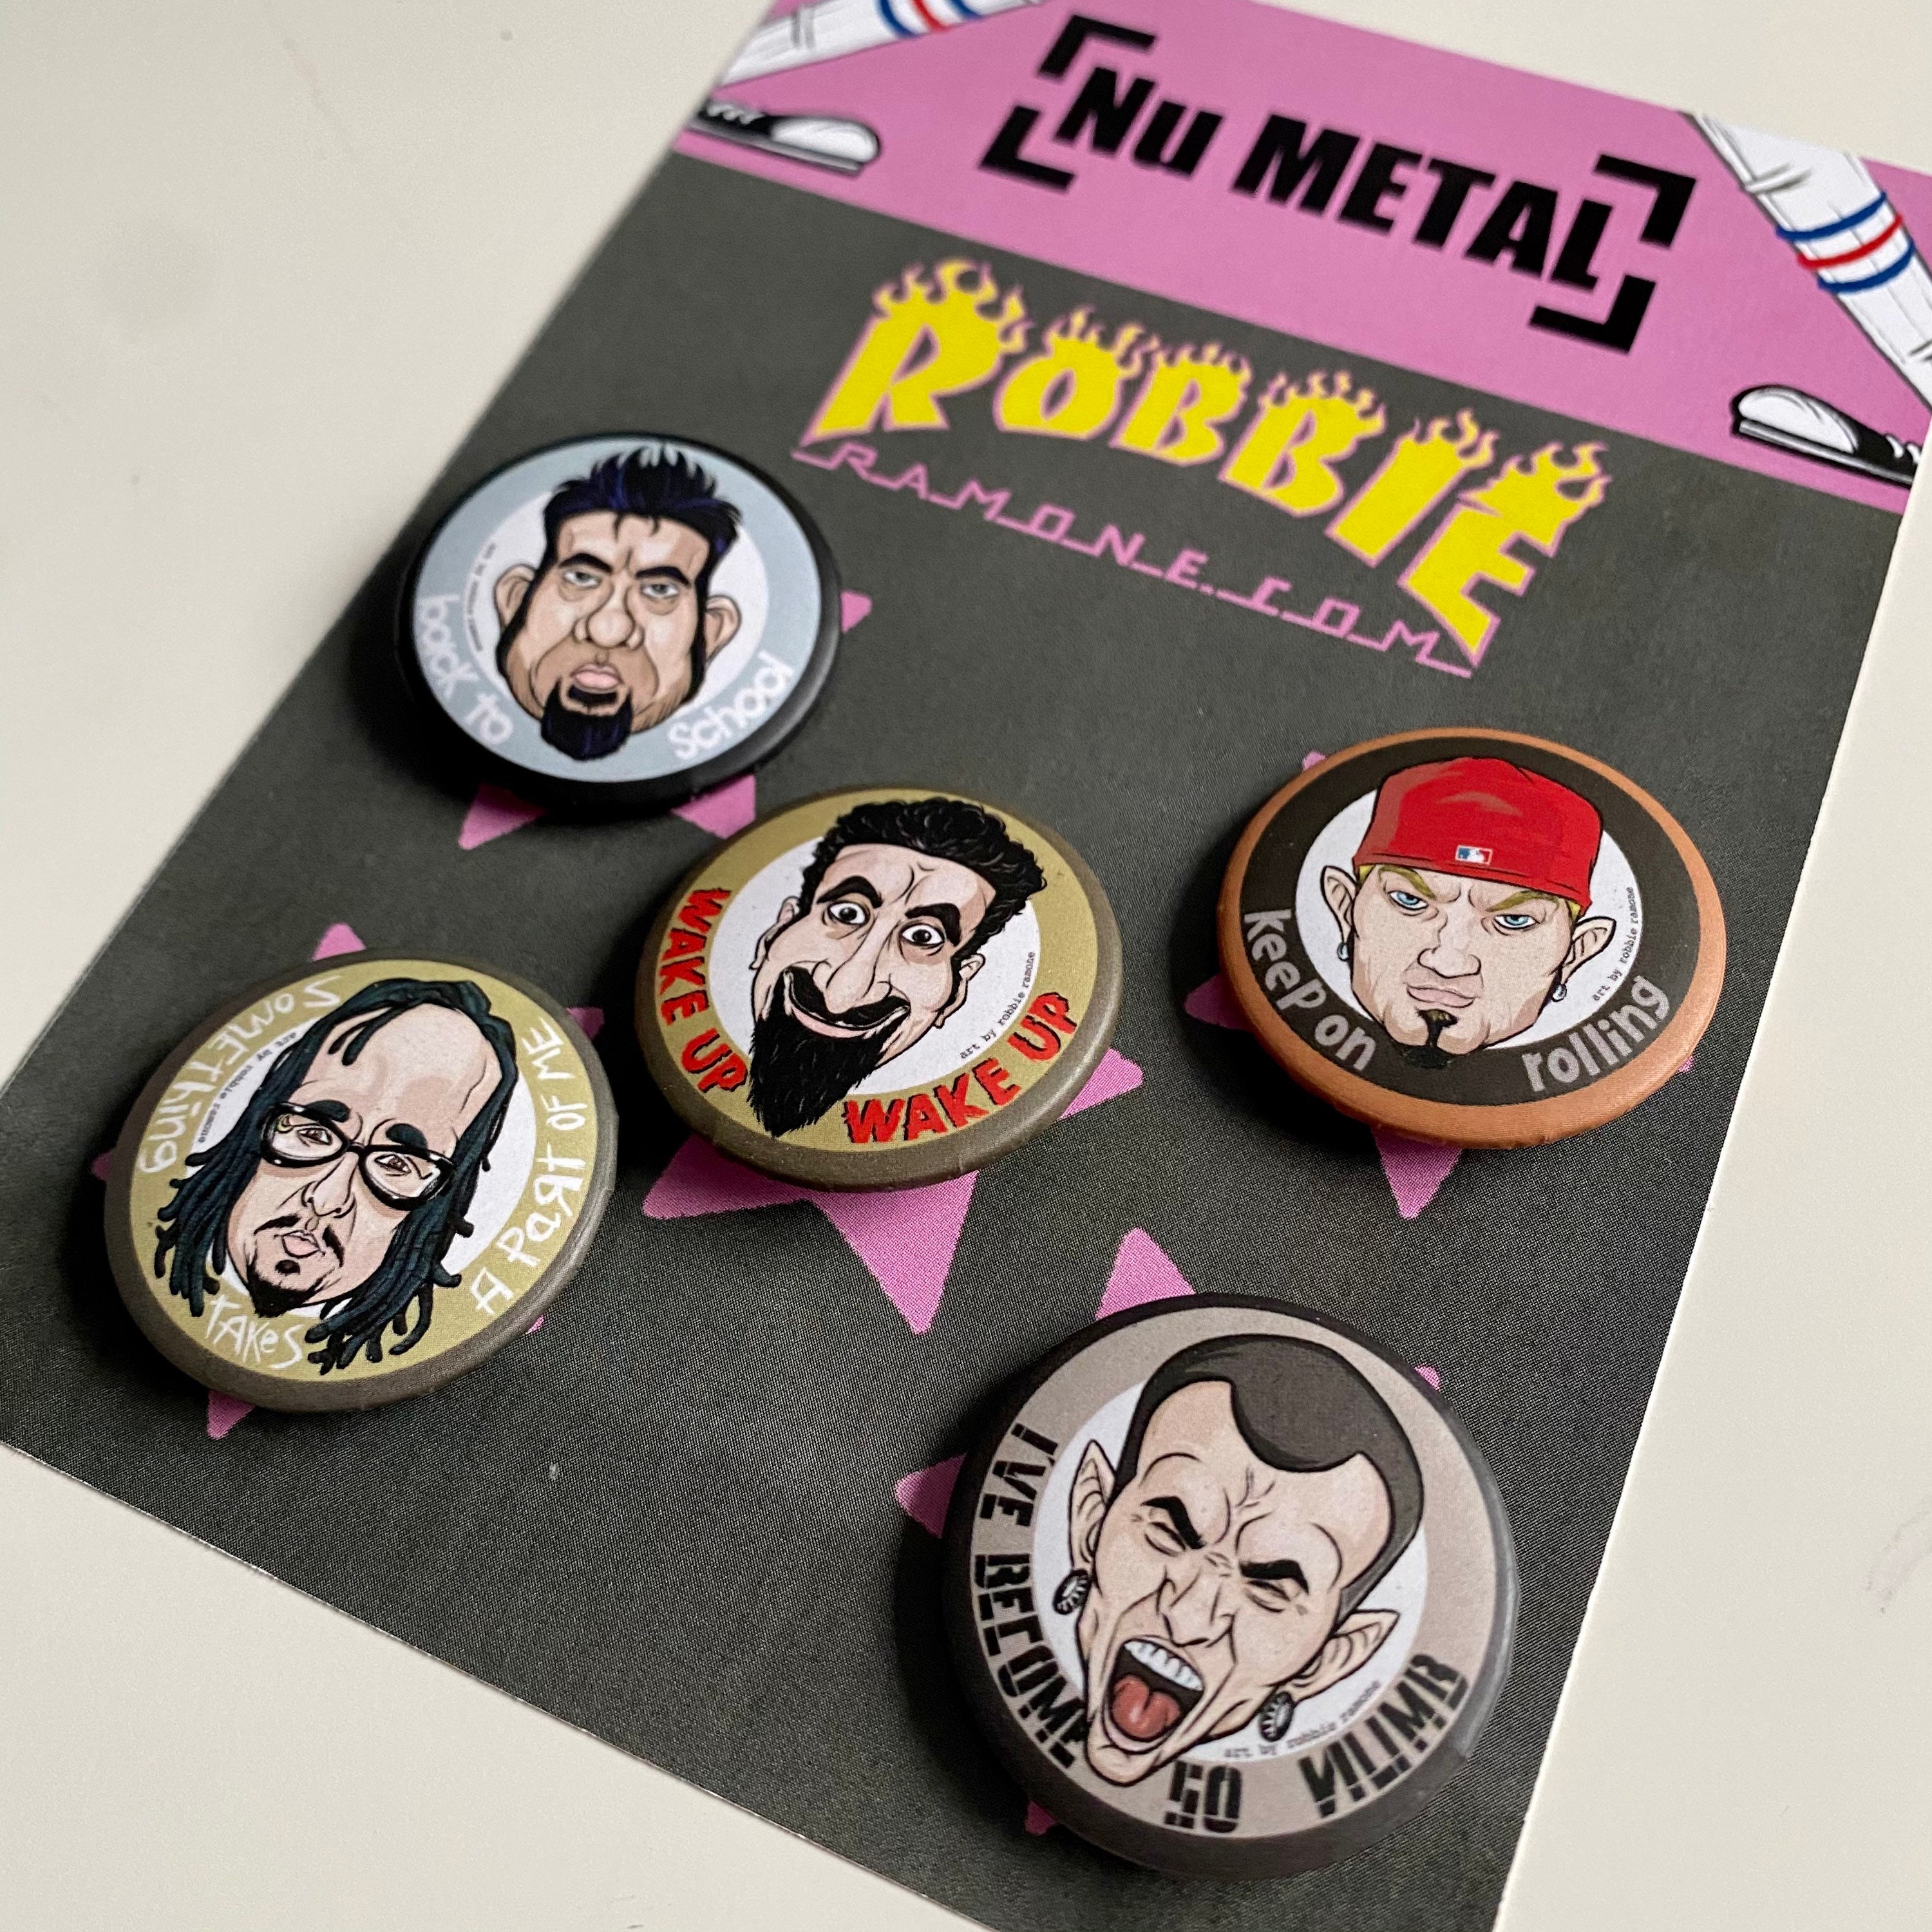 Thrash Metal band buttons (1Inch, mixed lots, heavy metal, pins, badges)